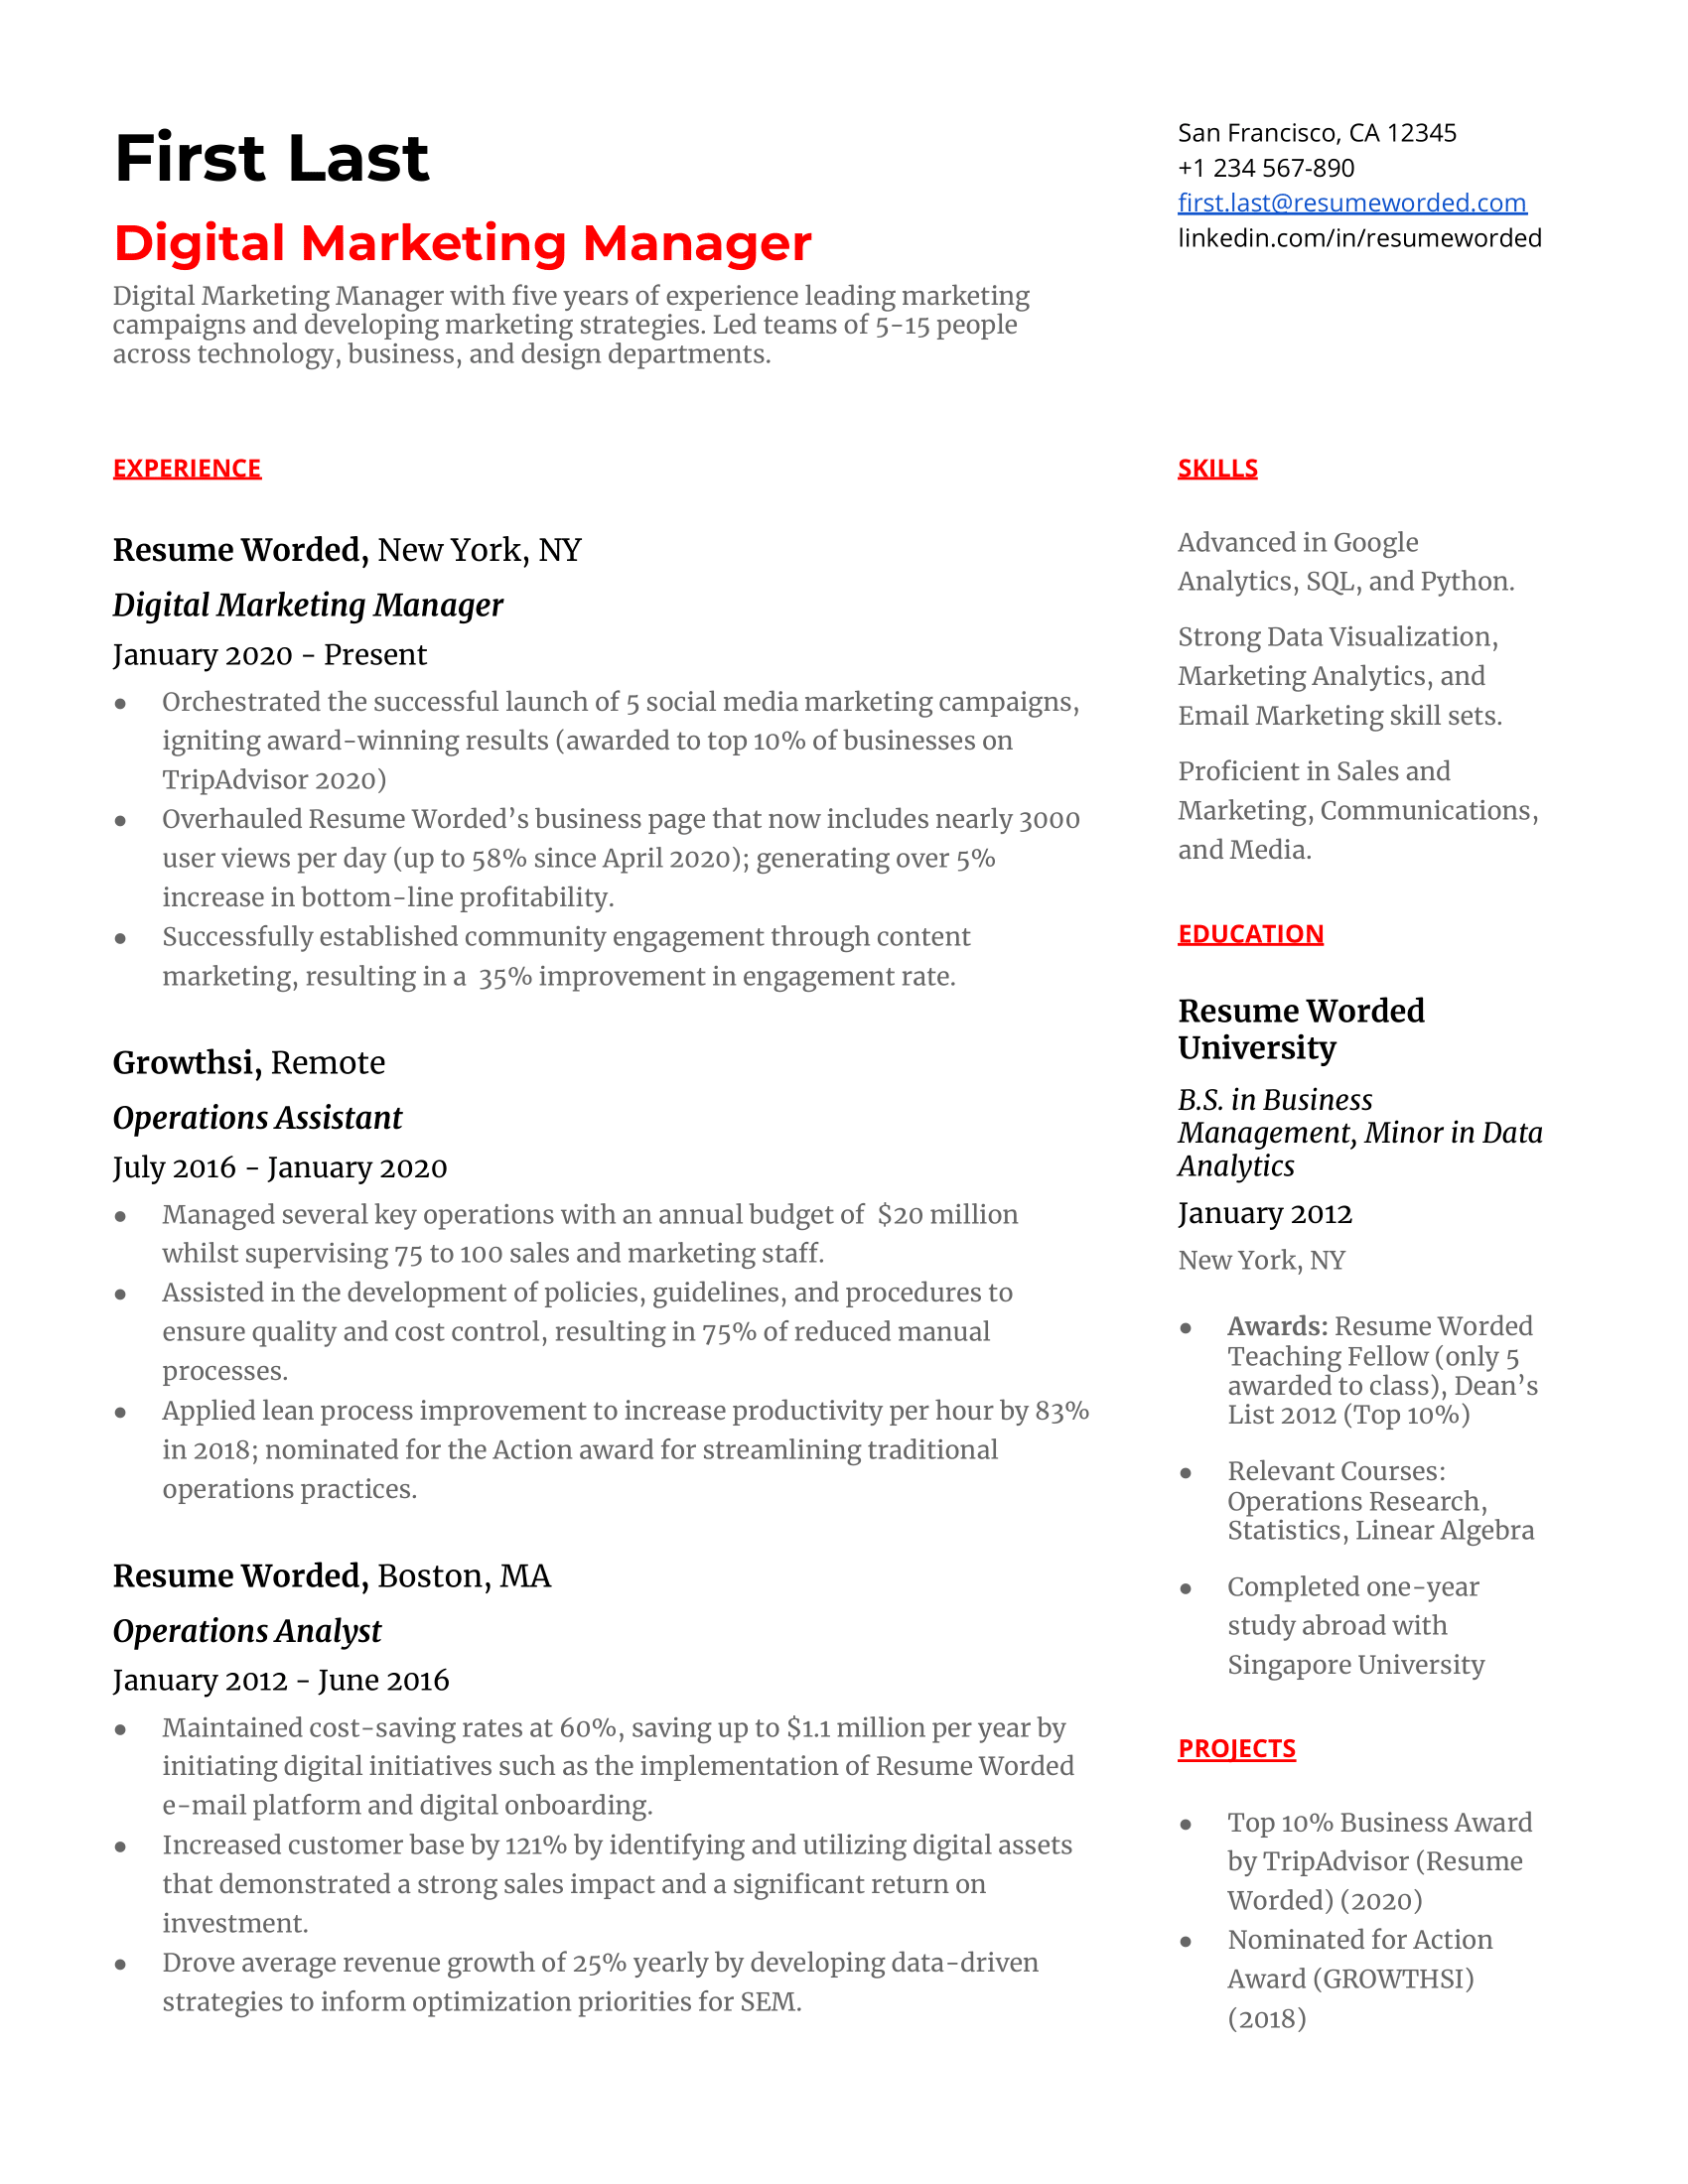 A digital marketing manager resume template accentuating leadership experience. 